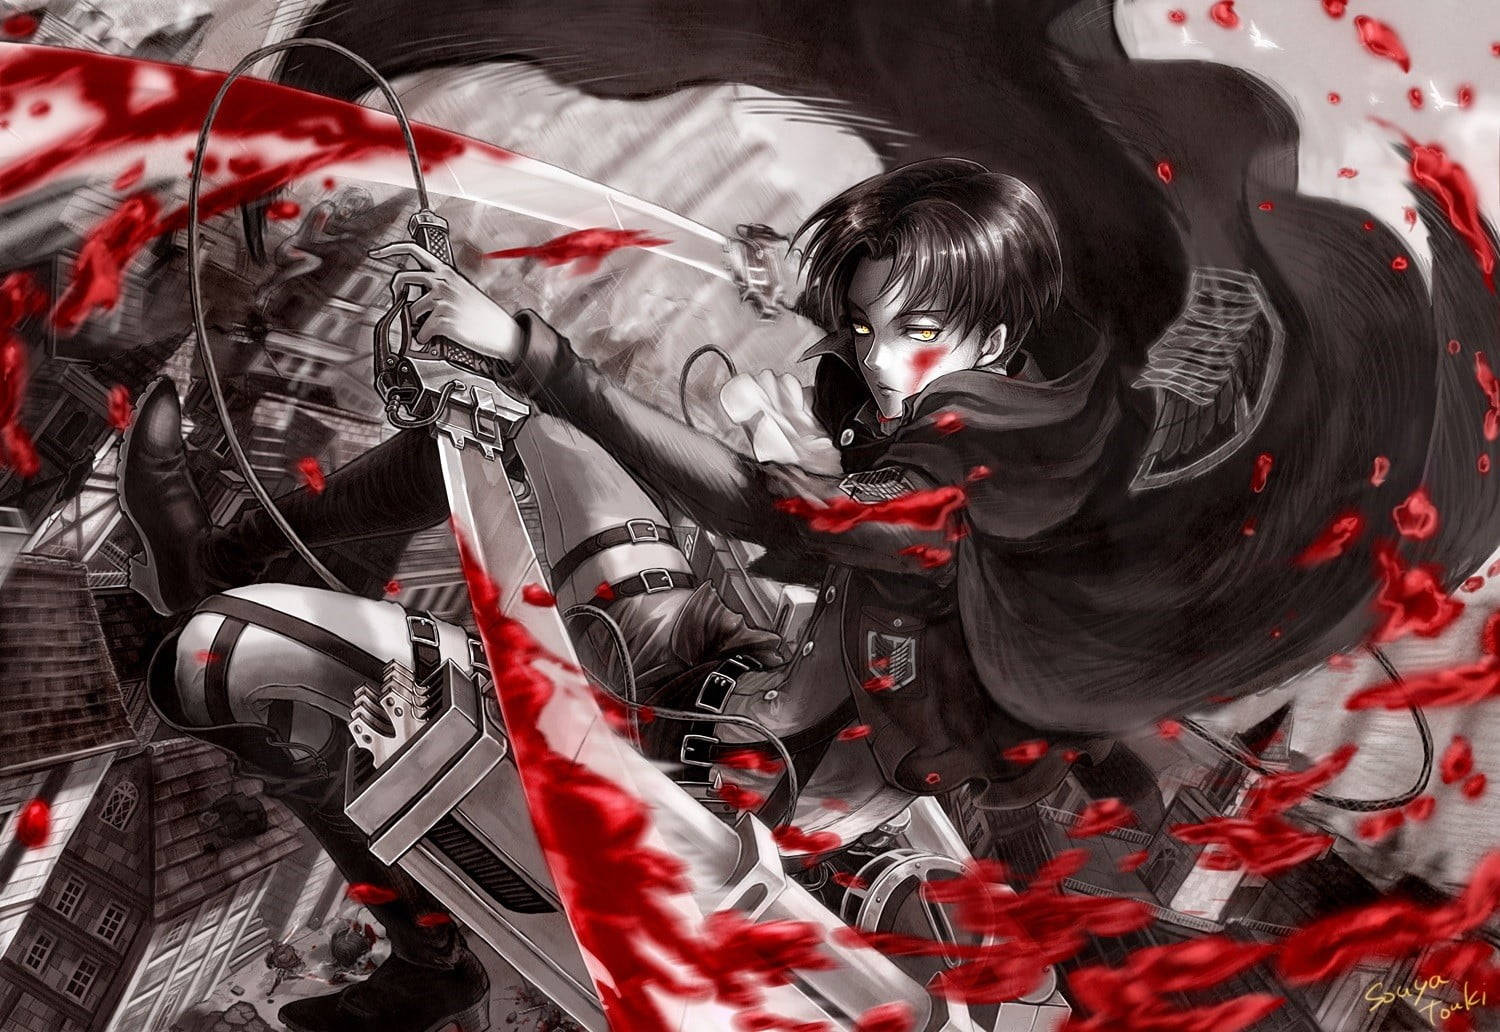 Download Red Anime Bloody Attack Wallpaper 